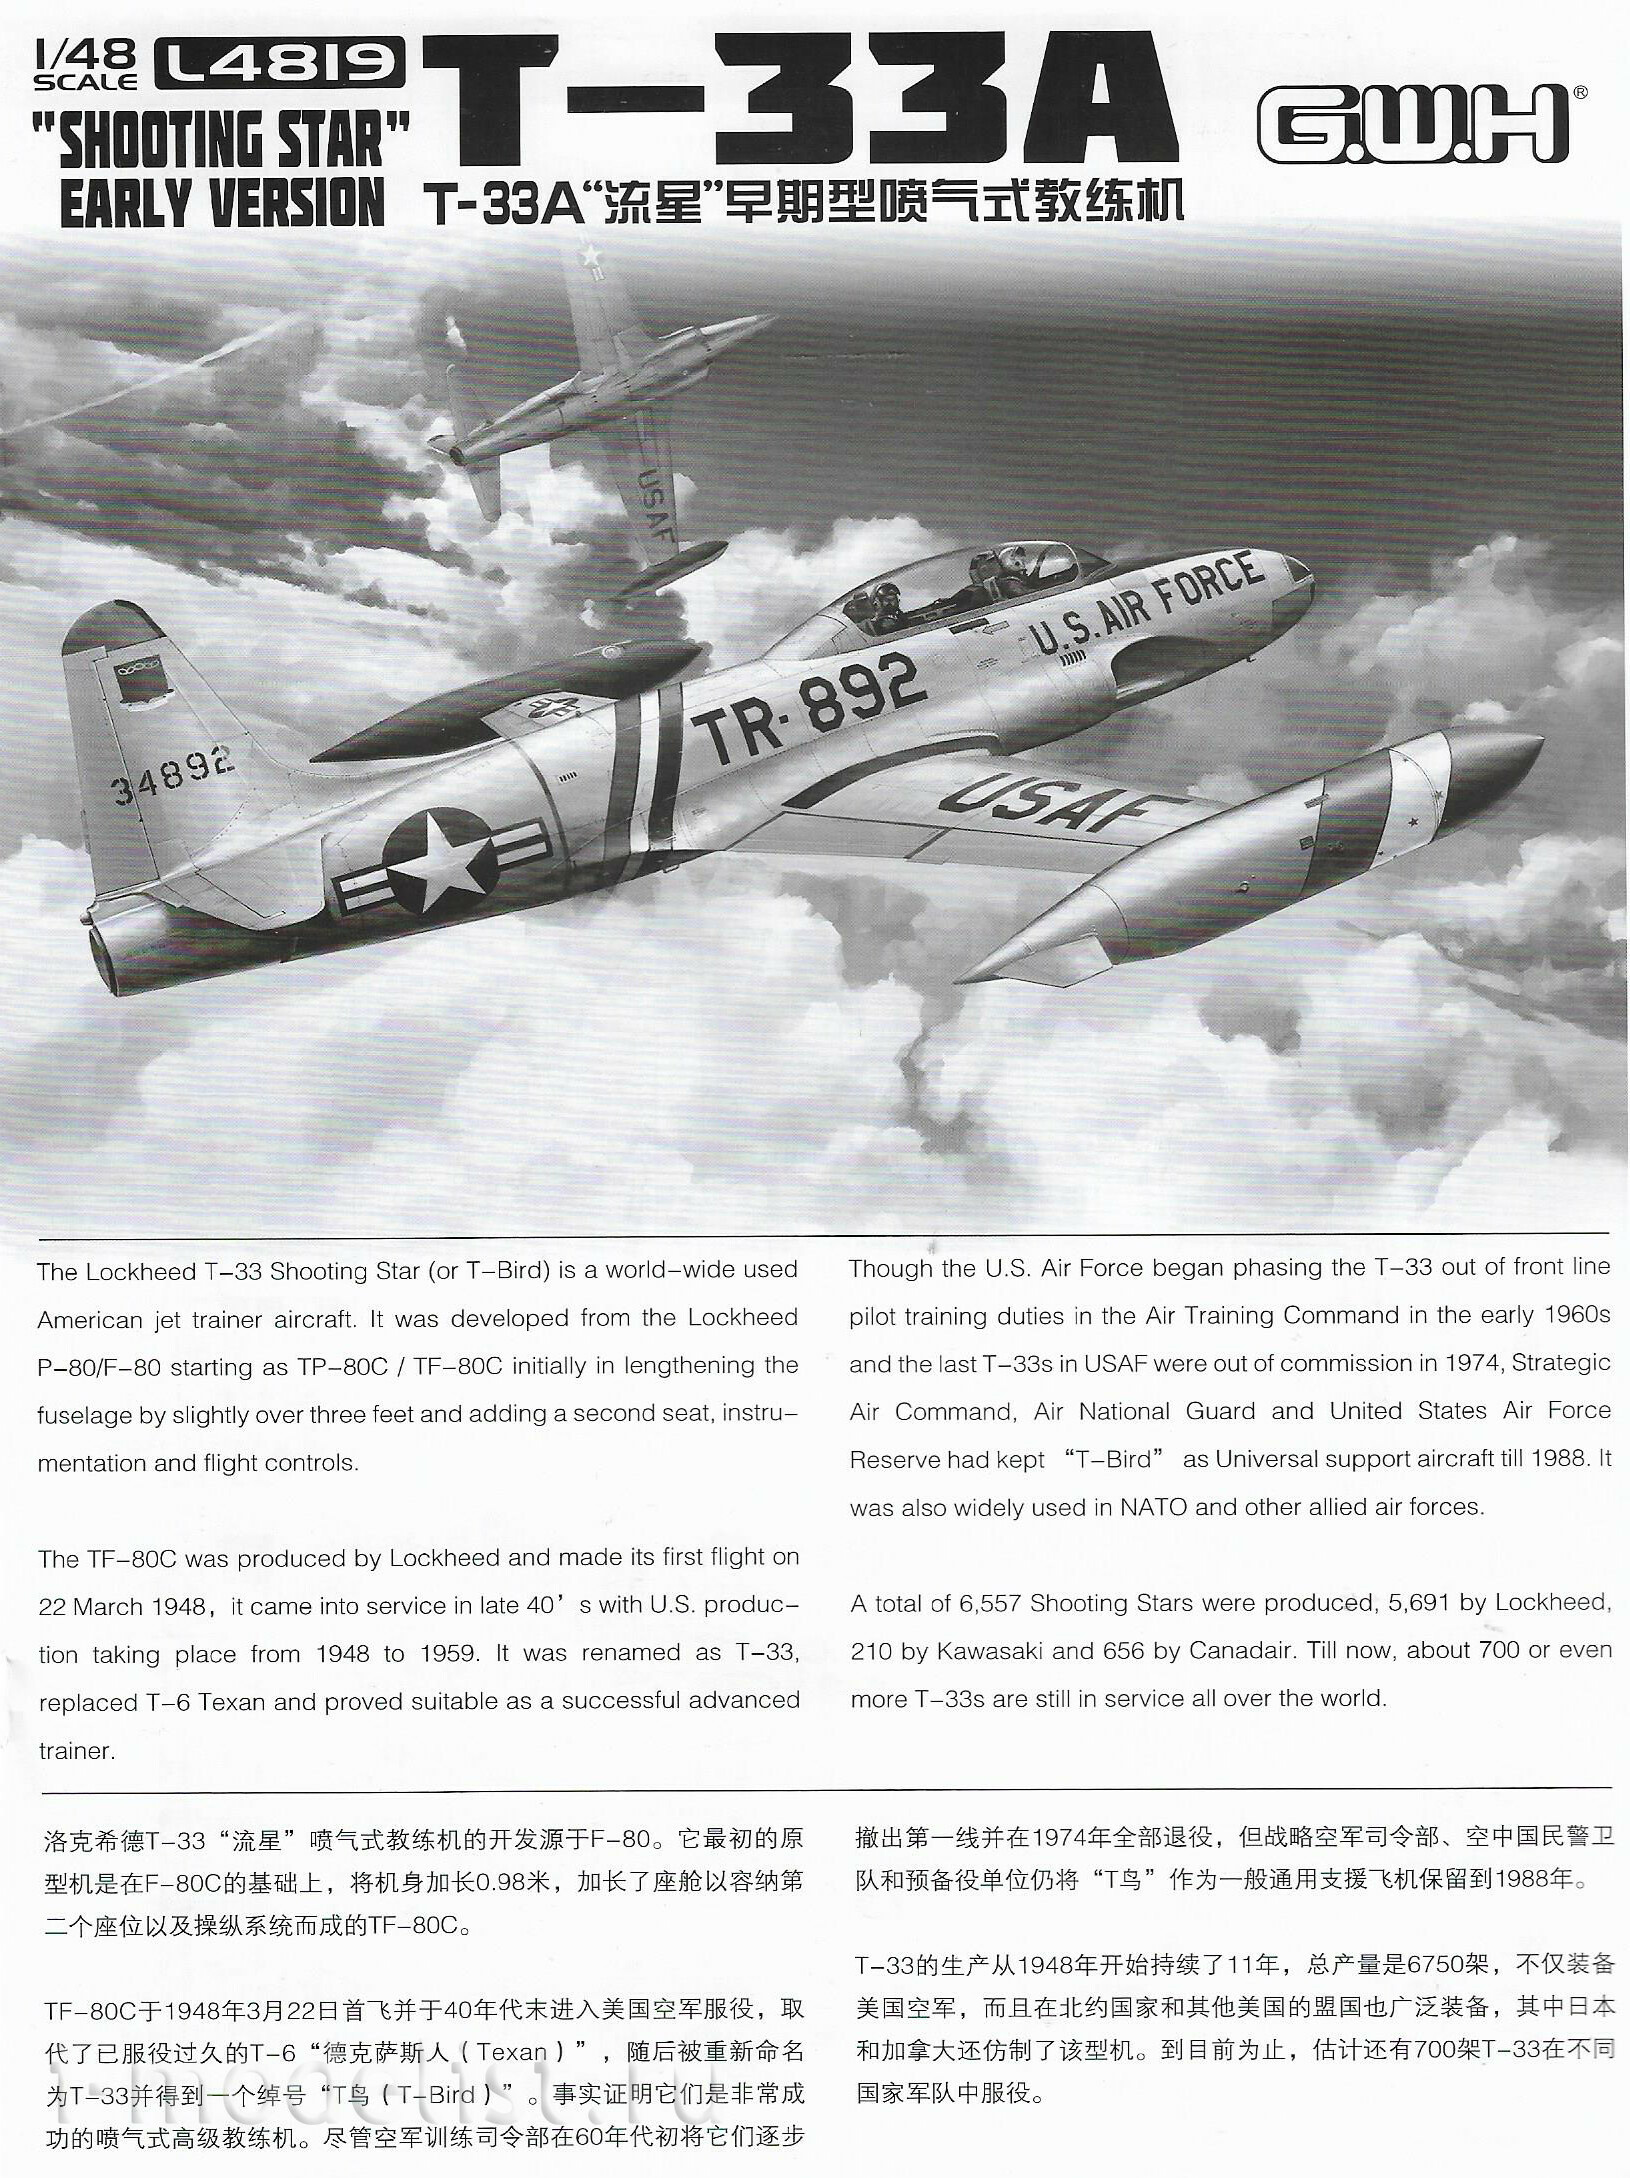 L4819 Great Wall 1/48 T-33A Early Version